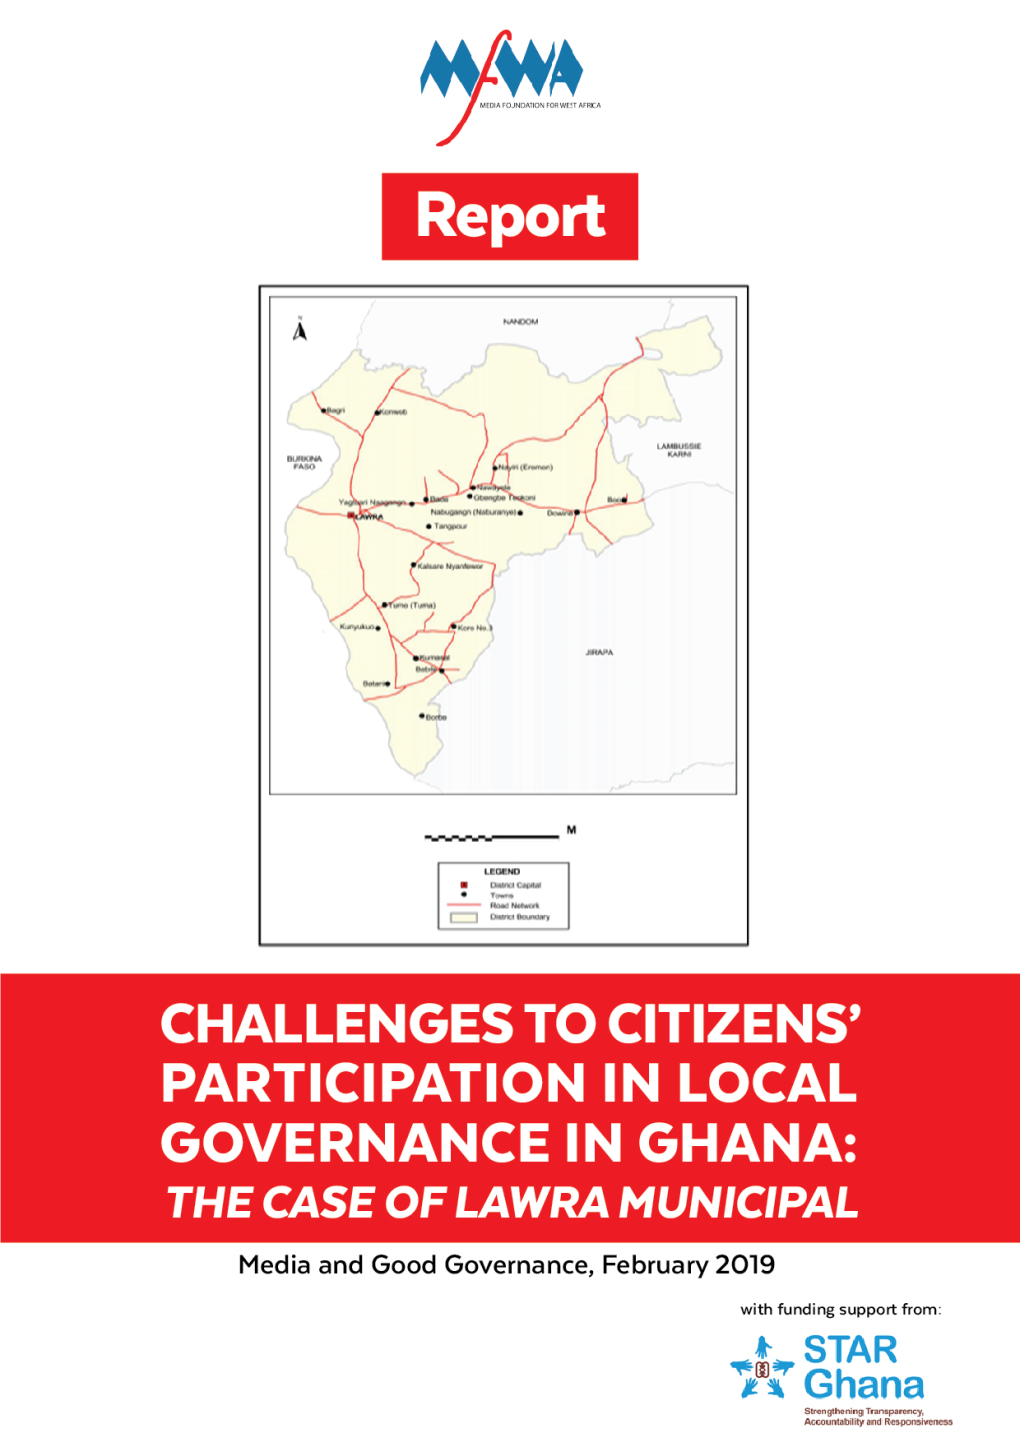 Challenges to Citizens' Participation in Local Governance in Ghana